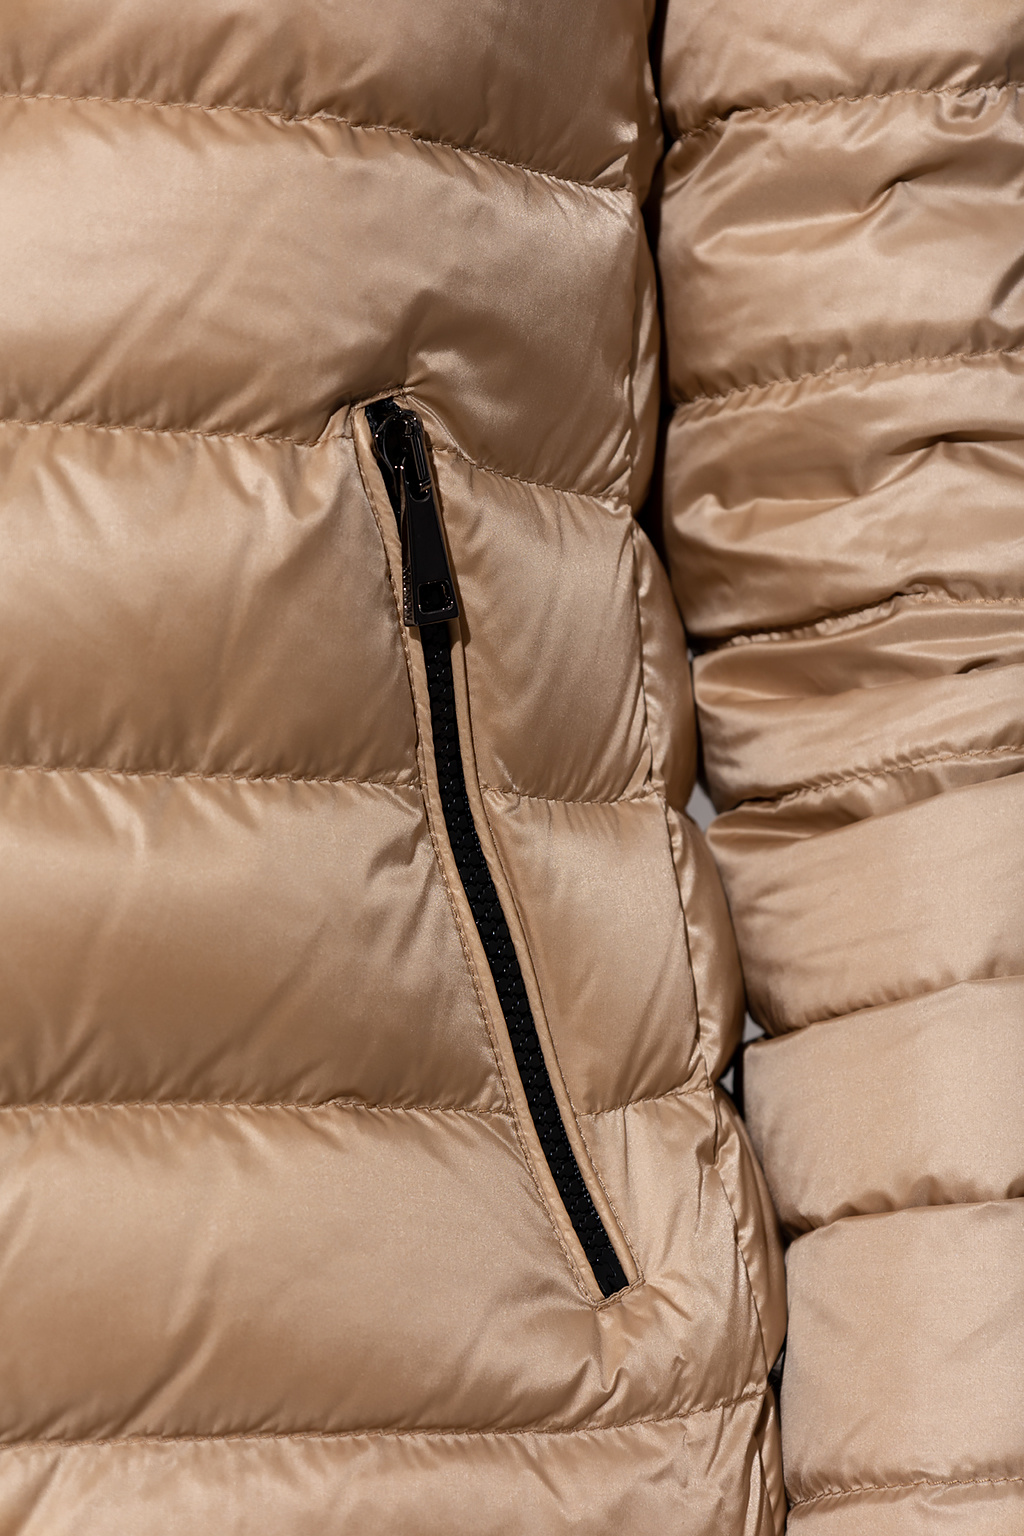 Moncler ‘Bles’ hooded down jacket